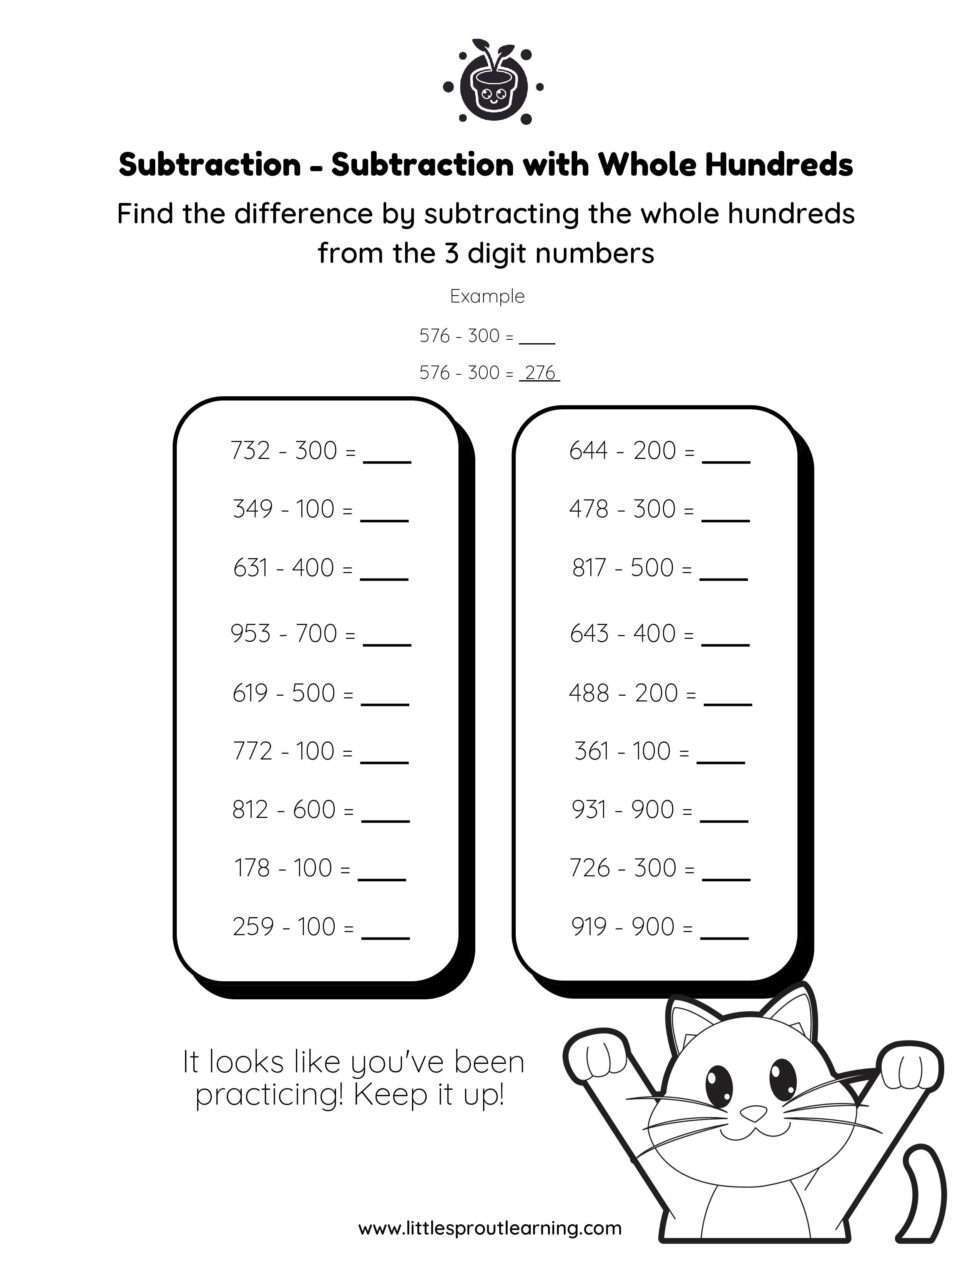 subtraction-with-whole-hundreds-from-3-digit-numbers-with-regrouping